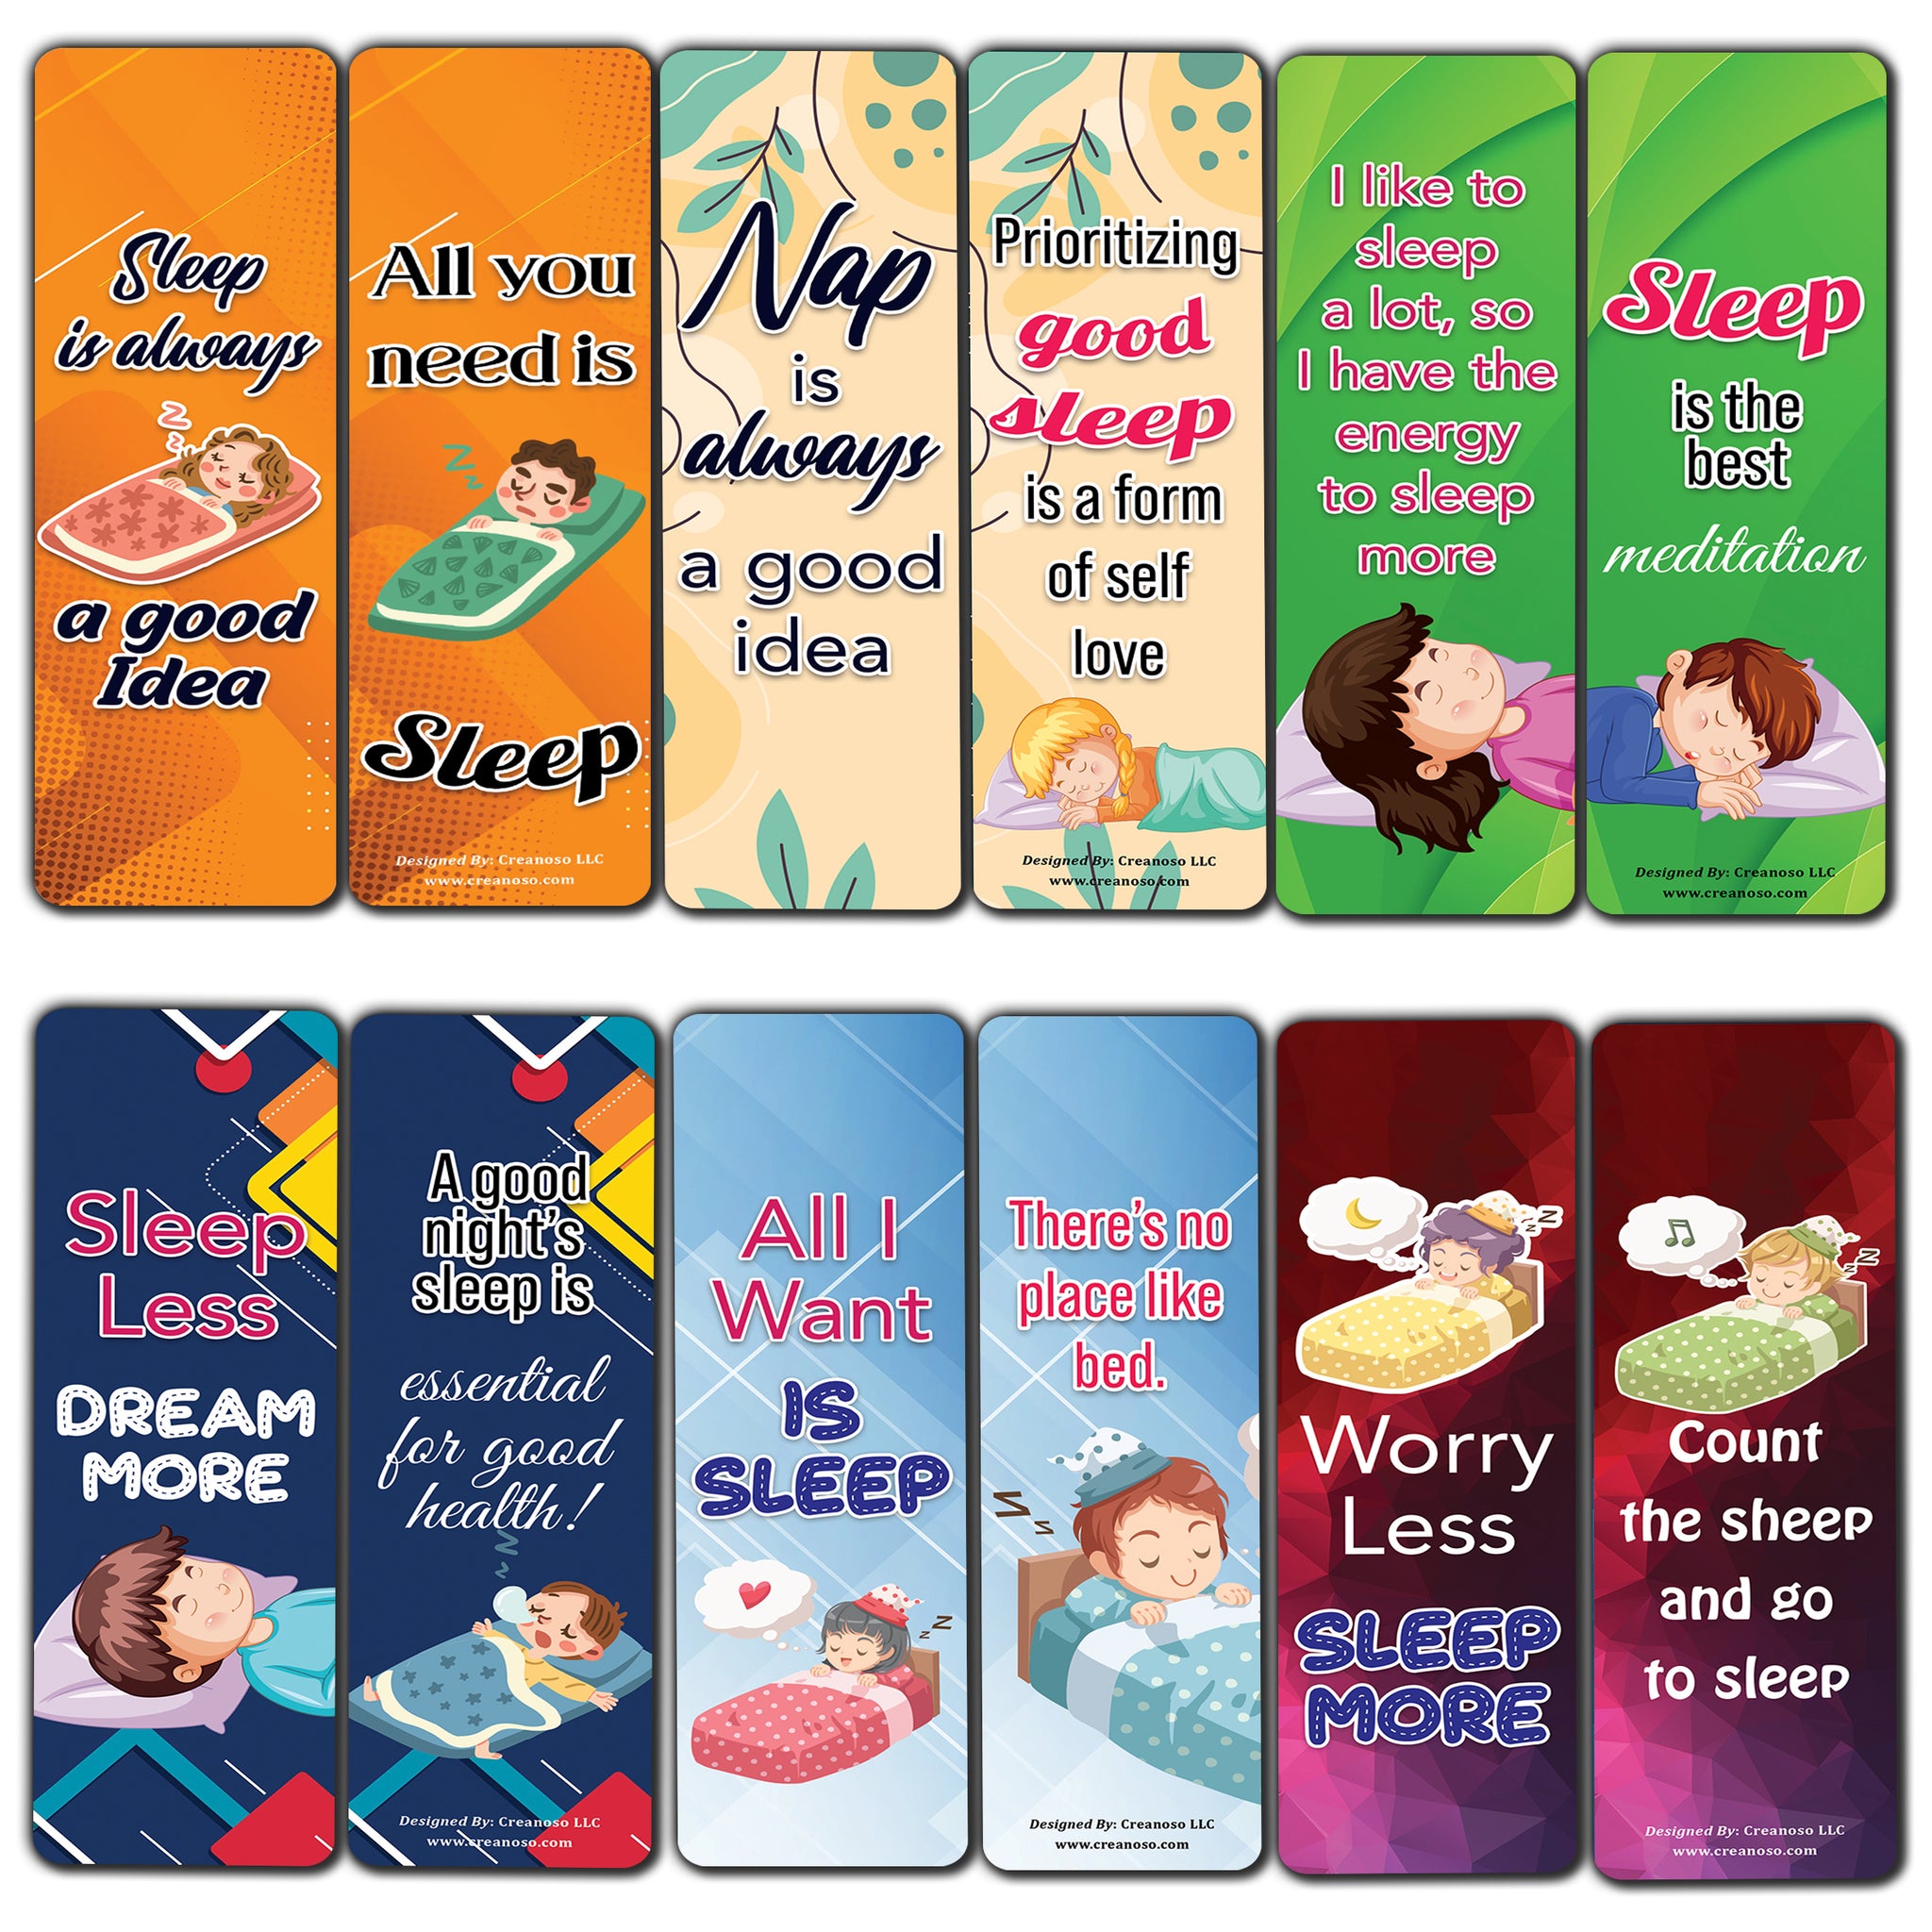 Creanoso Sleep is Good Bookmark (10-Sets X 6 Cards) â€“ Daily Inspirational Card Set â€“ Interesting Book Page Clippers â€“ Great Gifts for Adults and Professionals